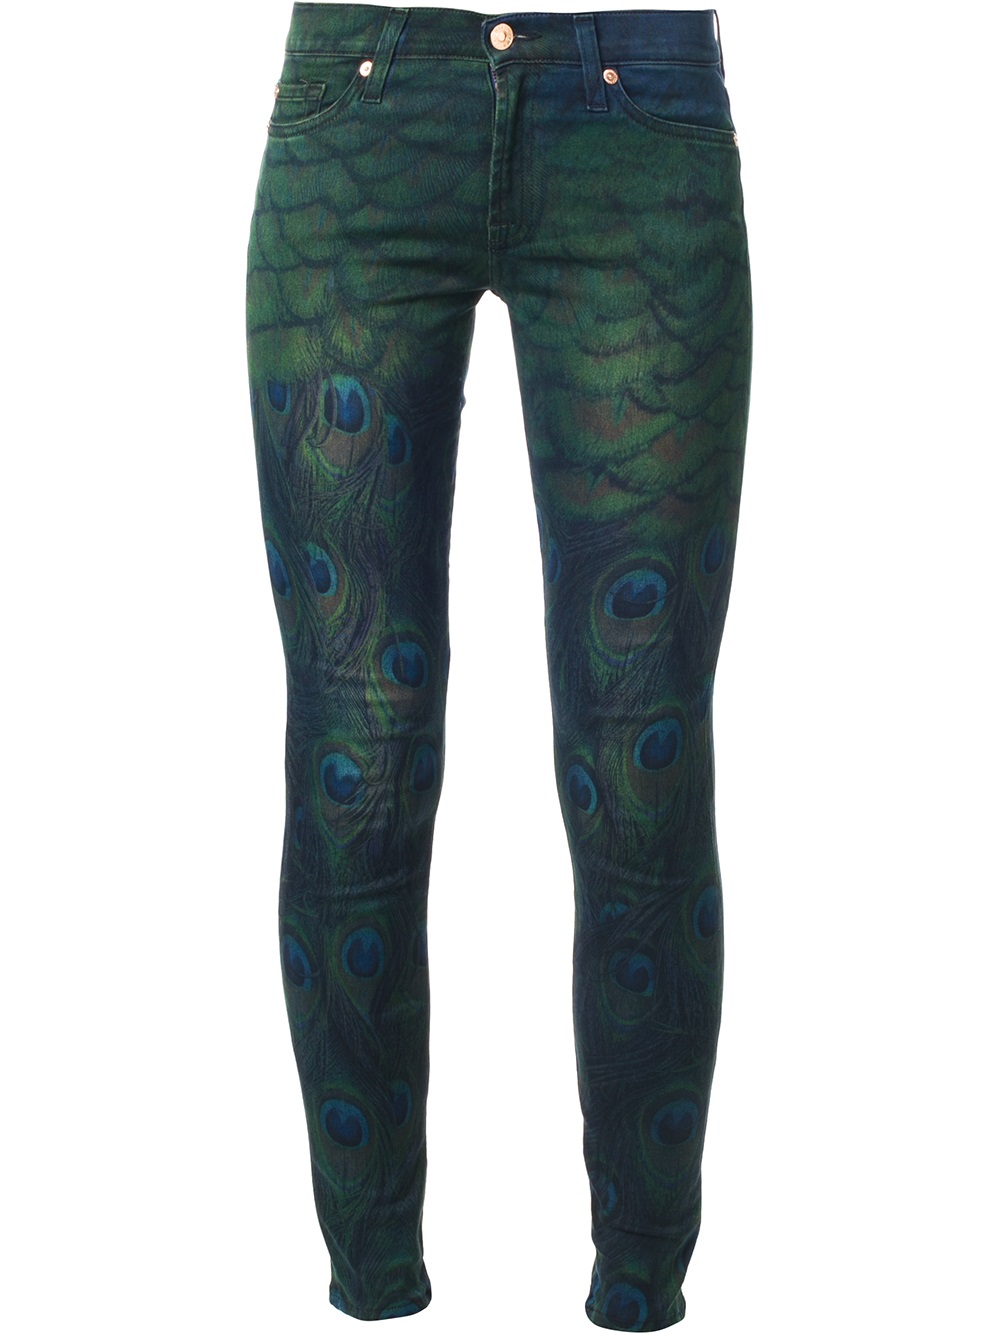 7 For All Mankind Peacock Print Skinny Jean in Blue | Lyst